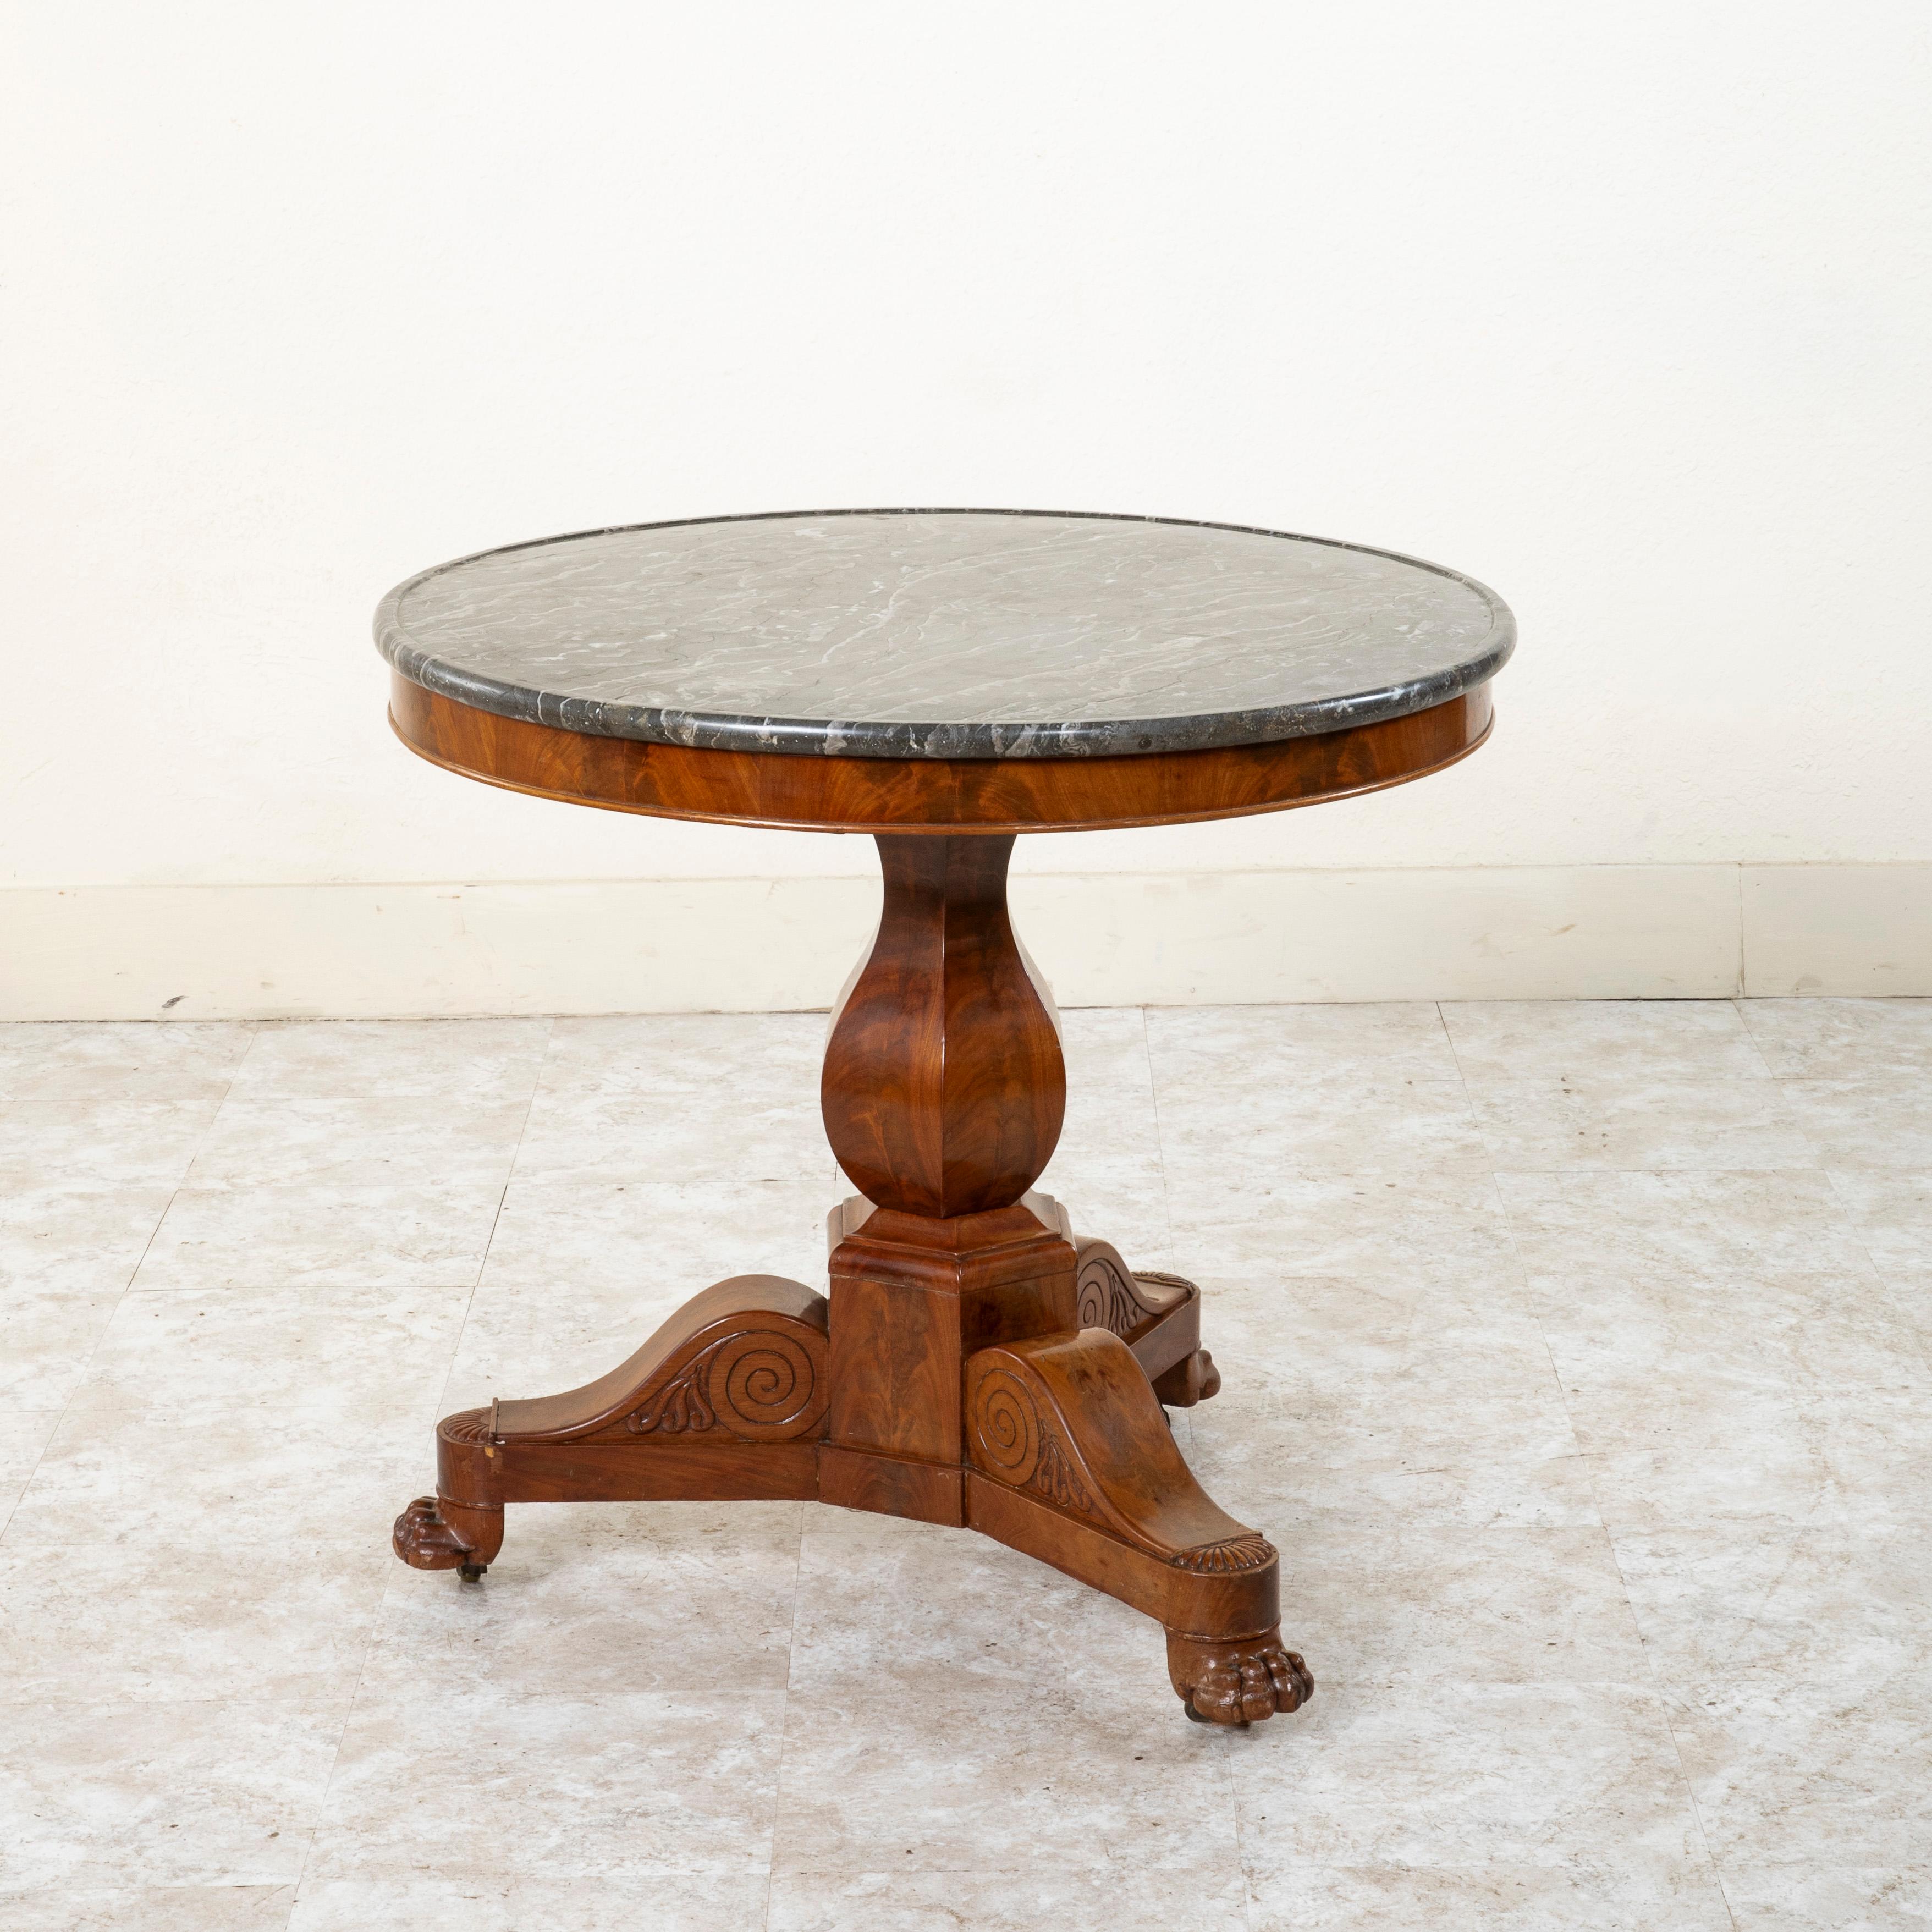 This mid-nineteenth century French Restauration period mahogany gueridon or pedestal table features a beveled Saint Anne marble top. Its 32 inch diameter top is supported by a faceted central pillar that rests on a tripod base. Its three legs are